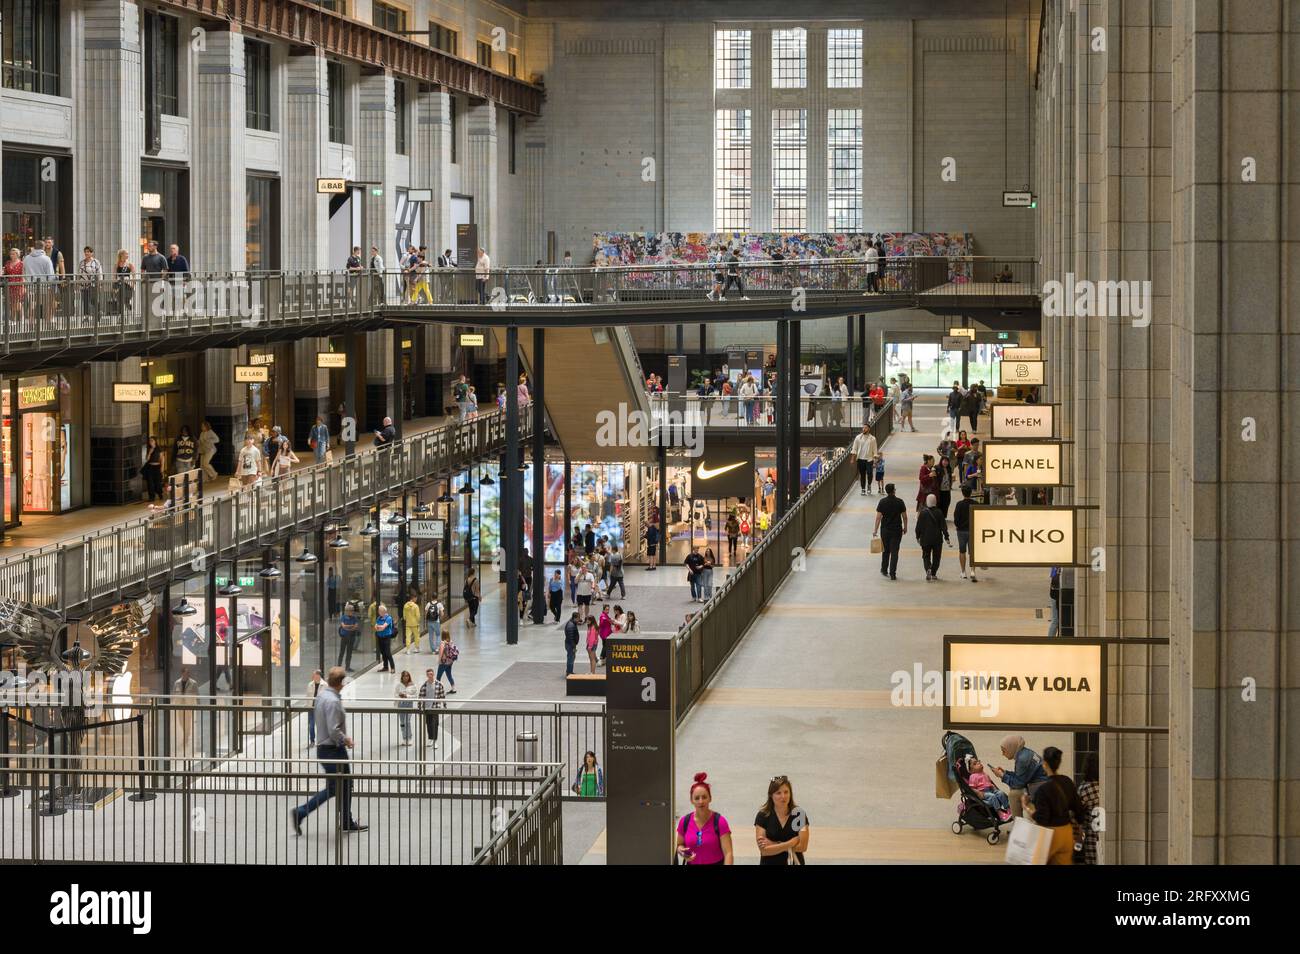 Interior of Battersea Power Station showing people walking past retail units as part of the redevelopment, London, UK Stock Photo